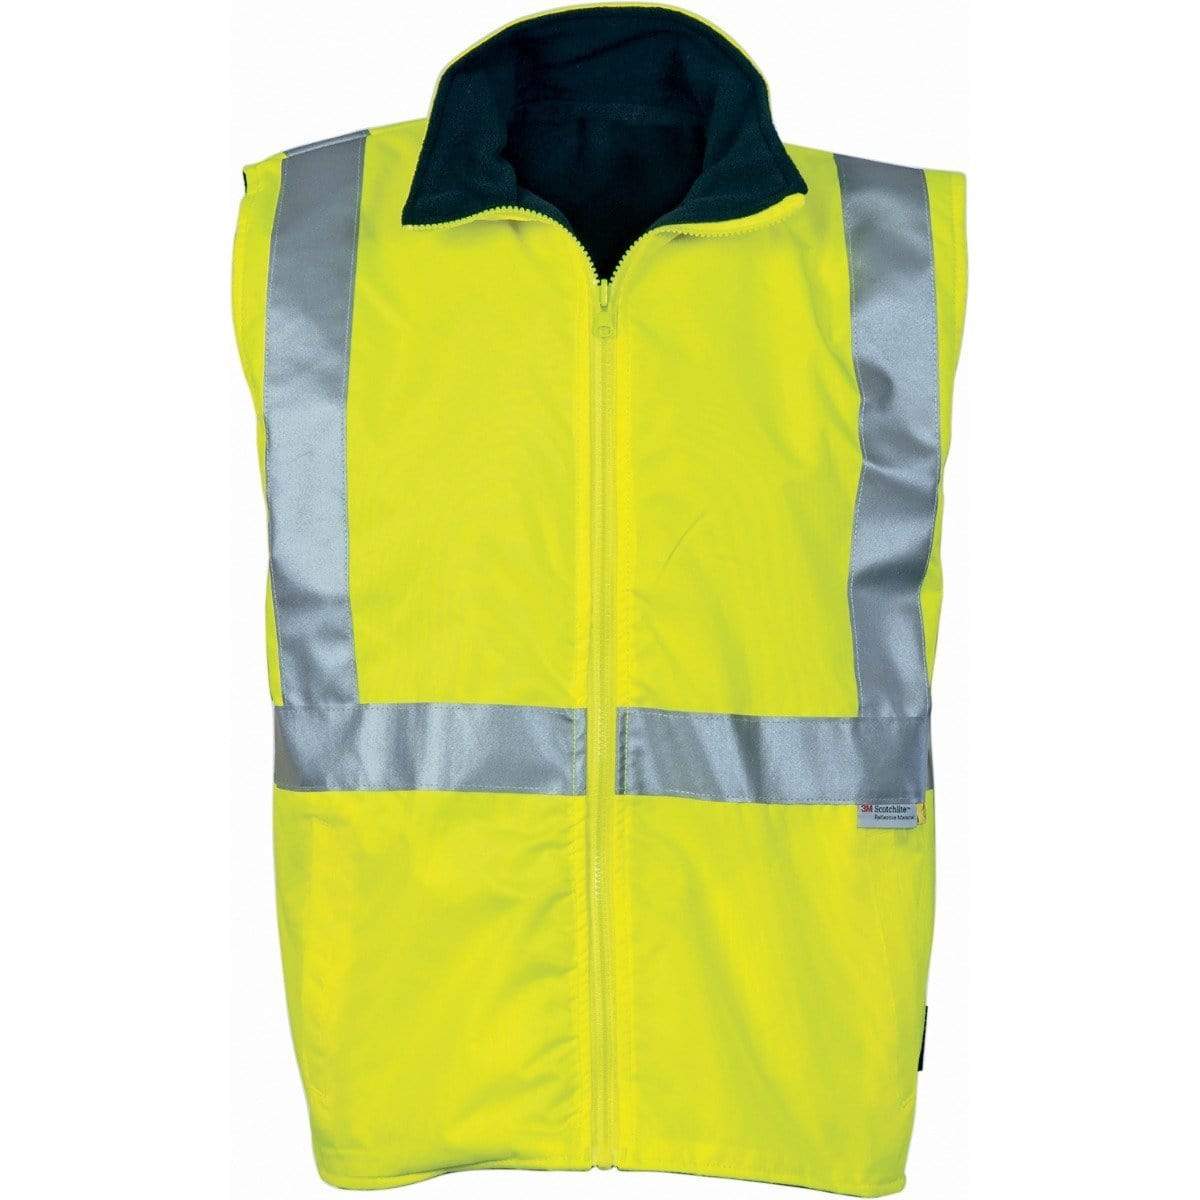 Dnc Workwear Hi-vis Reversible Vest With 3m Reflective Tape - 3865 Work Wear DNC Workwear Yellow/Navy S 